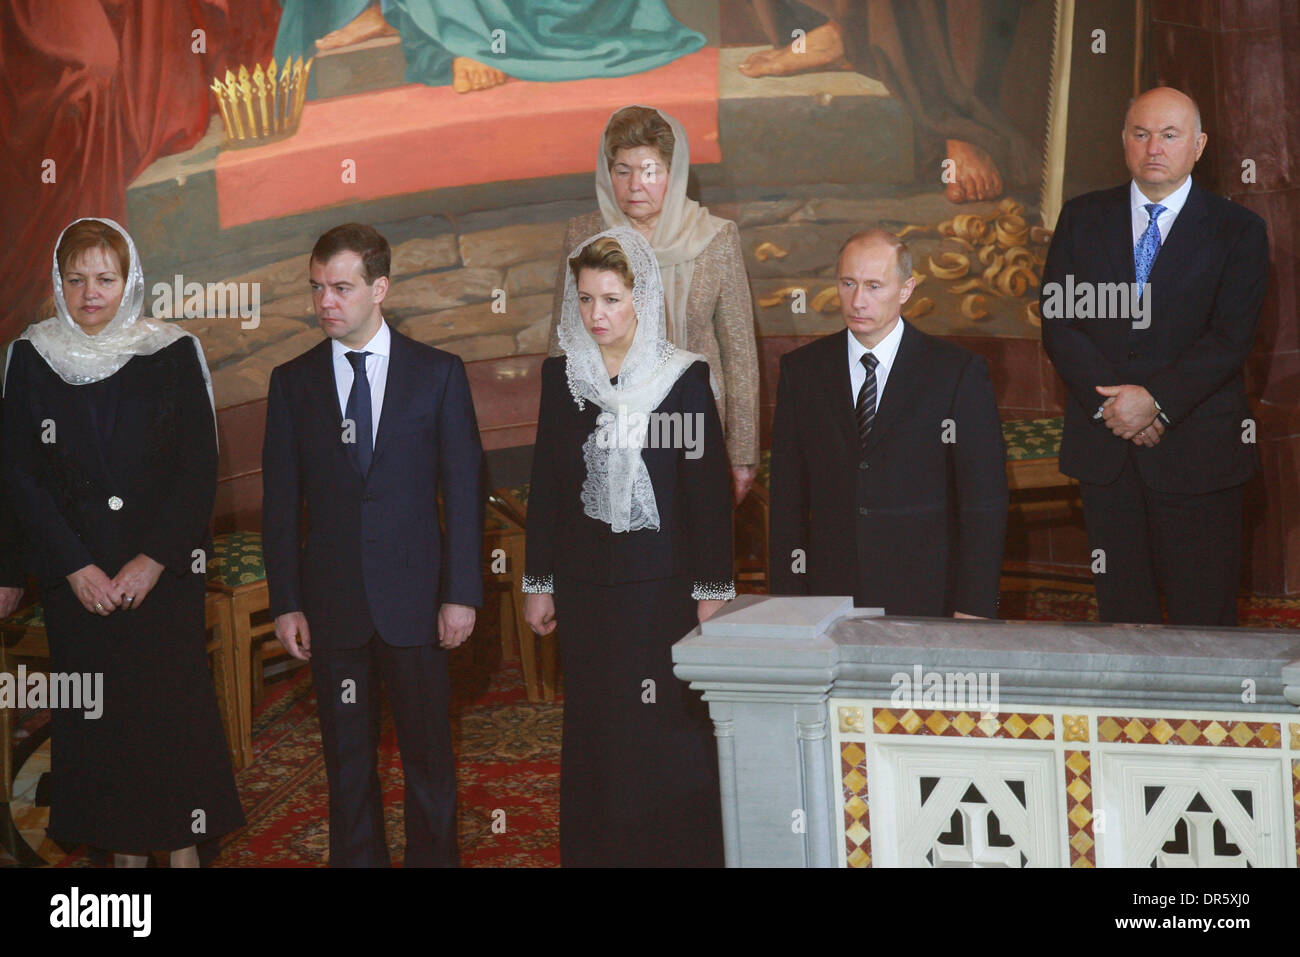 Feb 01, 2009 - Moscow, Russia - L-R Wife of Moldova President TAISIYA VORONINA, President DMITRY MEDVEDEV (C), his wife, SVETLANA MEDVEDEVA and Prime Minister VLADIMIR PUTIN (L) and Boris Yeltsin`s widow NAINA YELTSINA in the background attending the enthronement ceremony of Patriarch Kirill of Moscow and All Russia, the 16th leader of the Russian Orthodox Church, at the Cathedral  Stock Photo